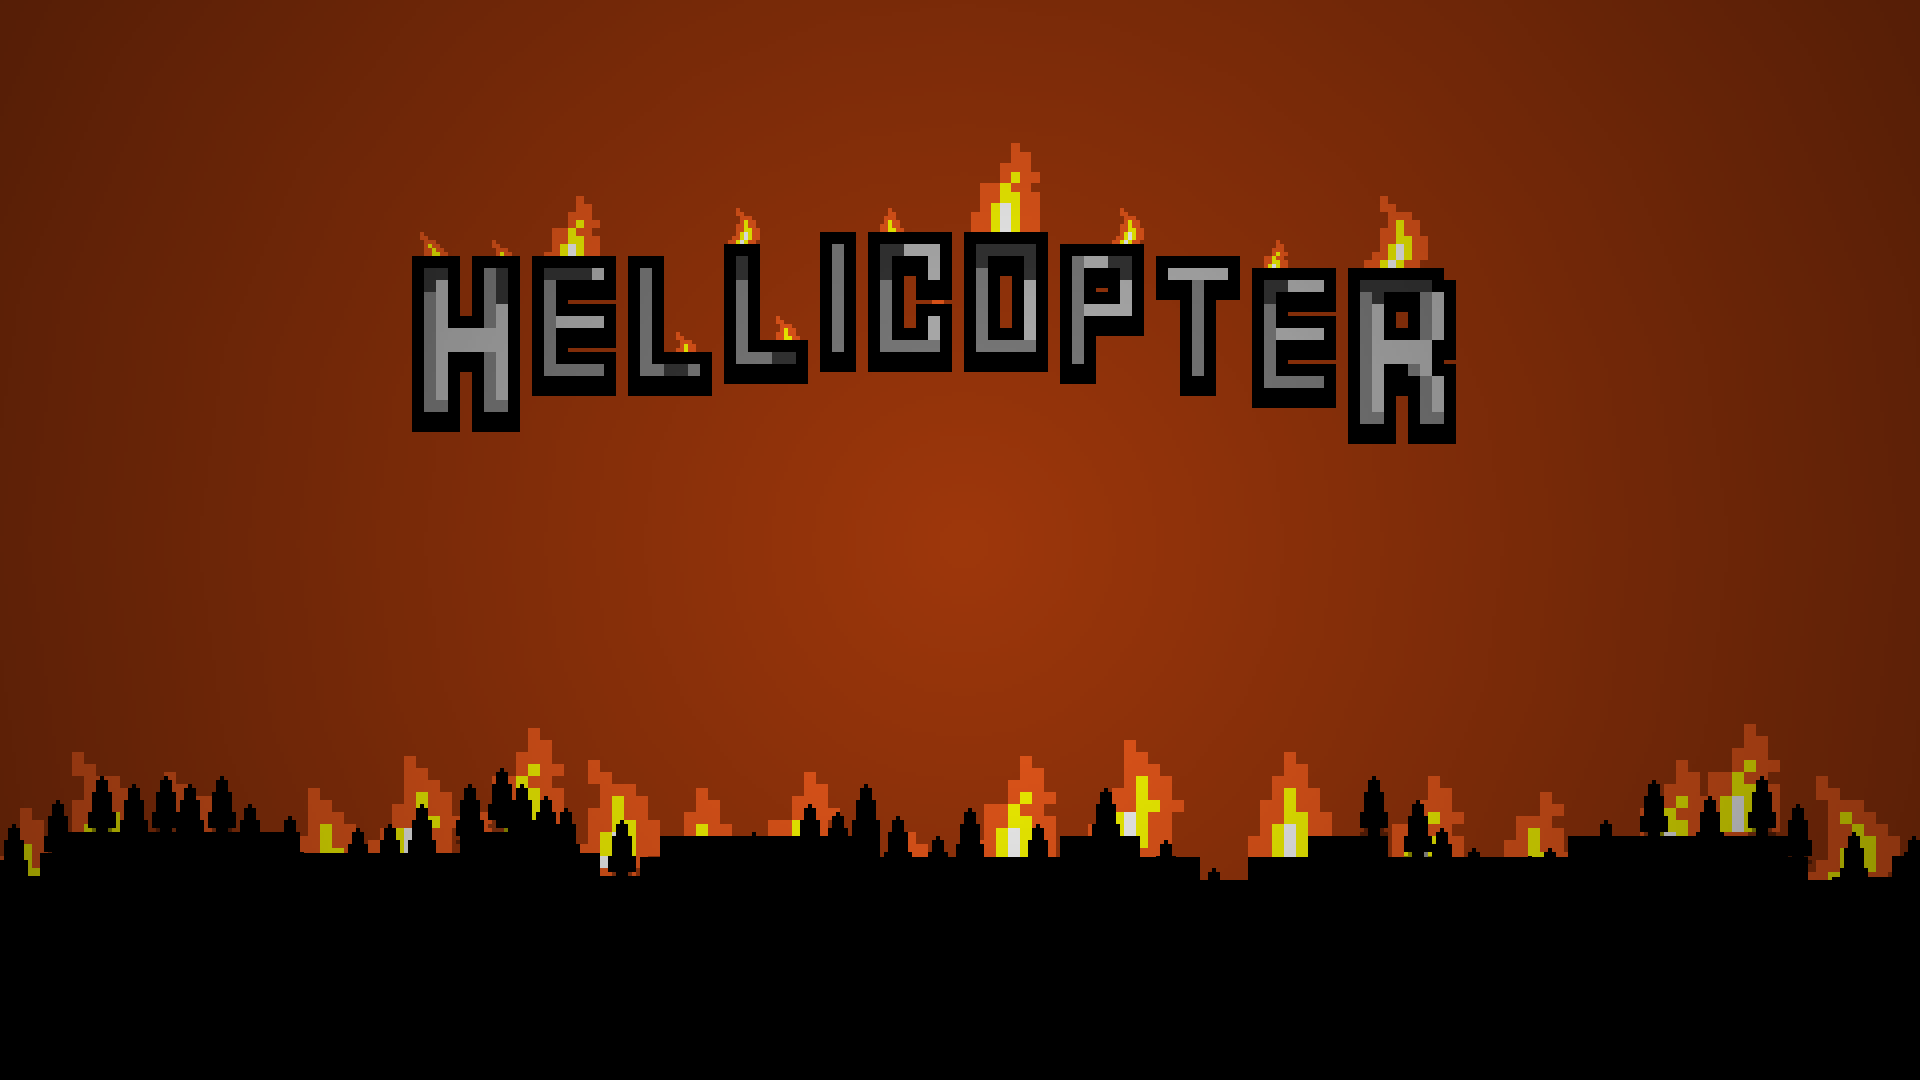 Hell-icopter